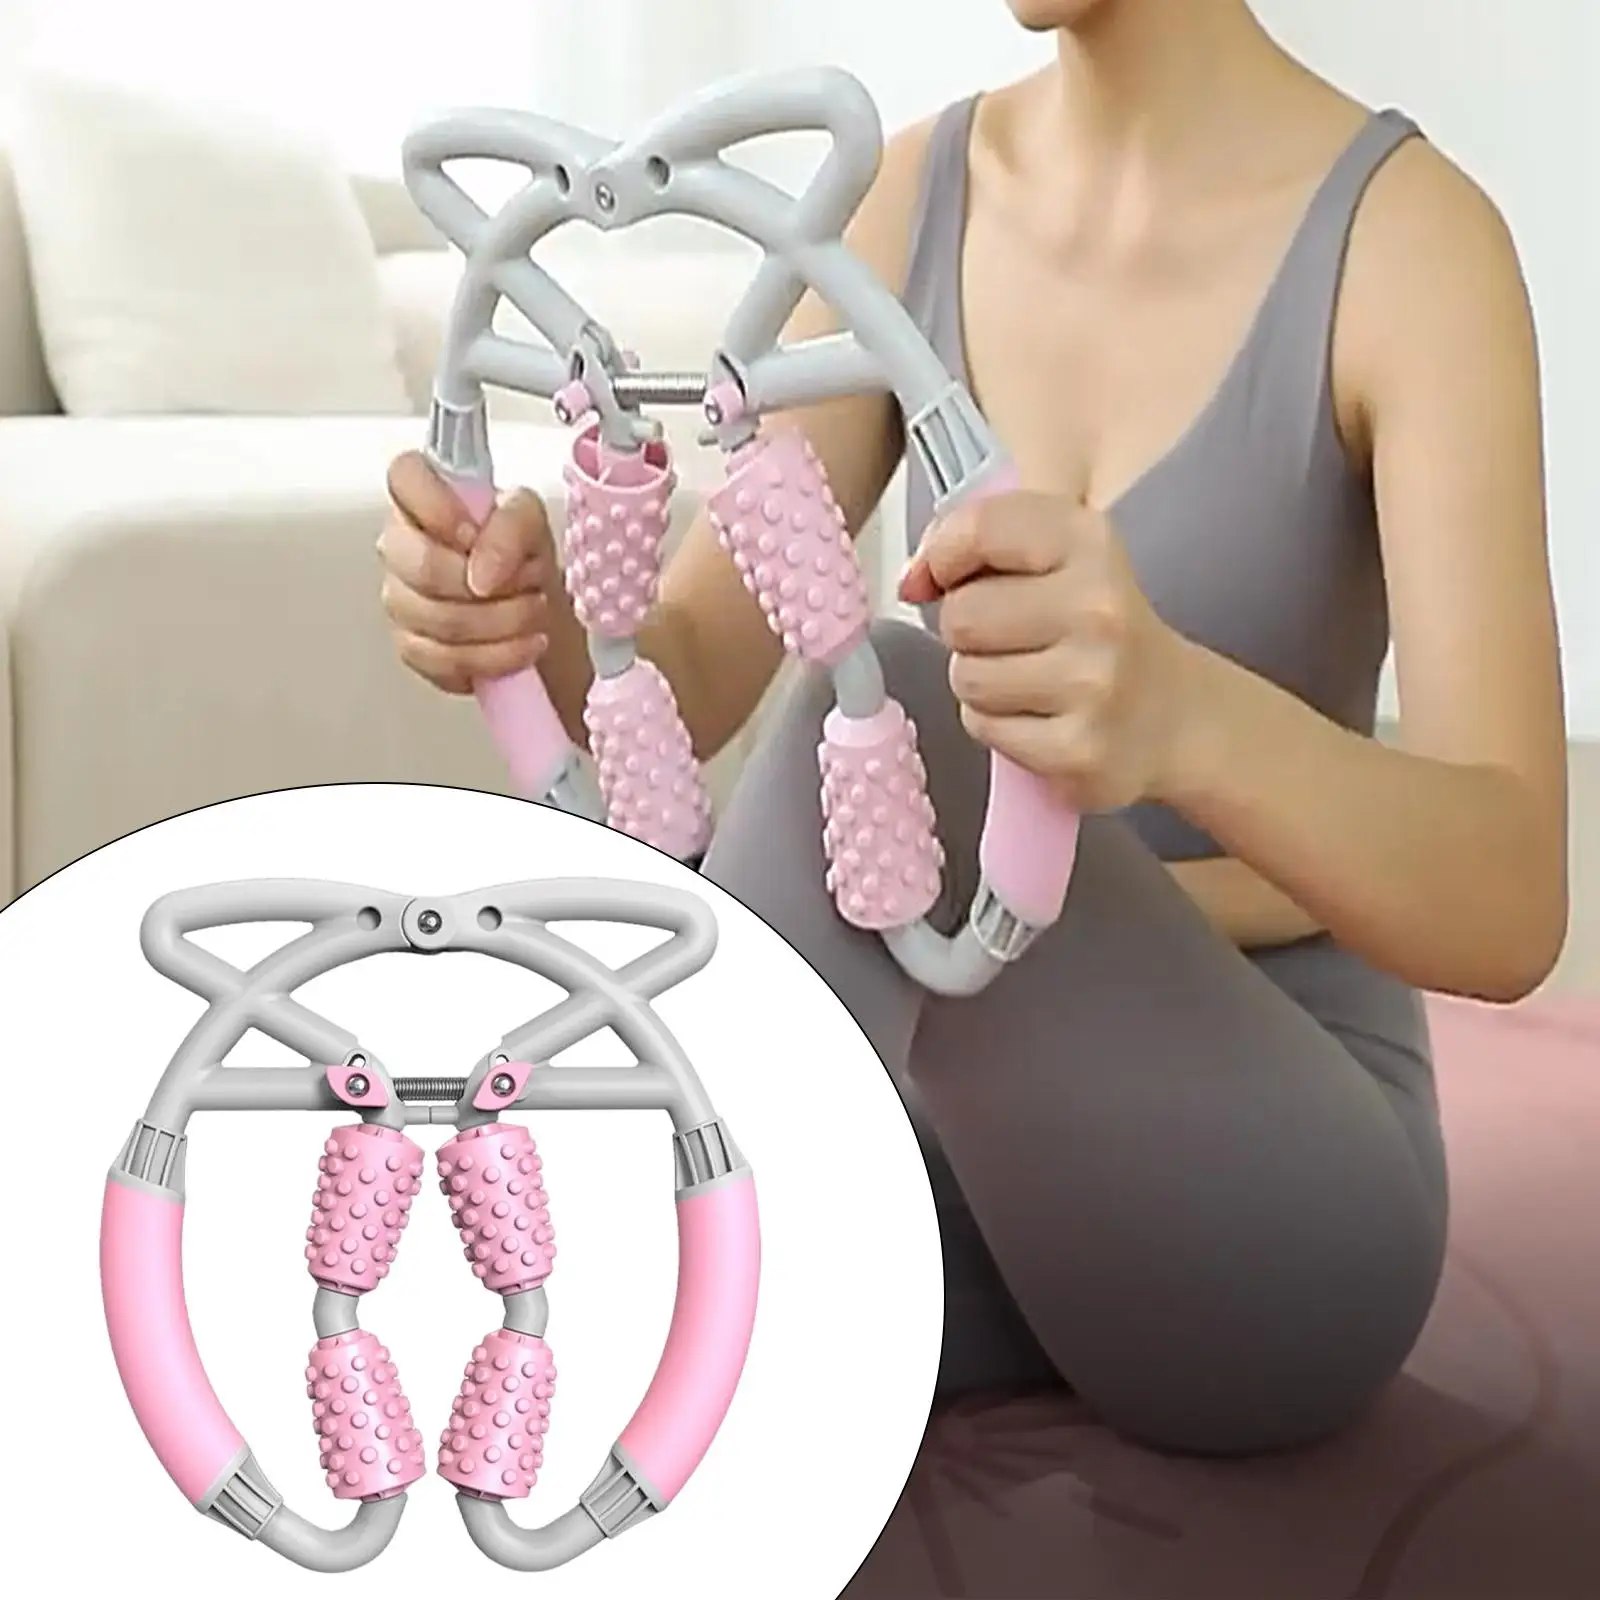 360° Massage Roller Hand Massager for Cellulite, Muscle Relaxer for Legs, , Tennis, Elbow, Arm